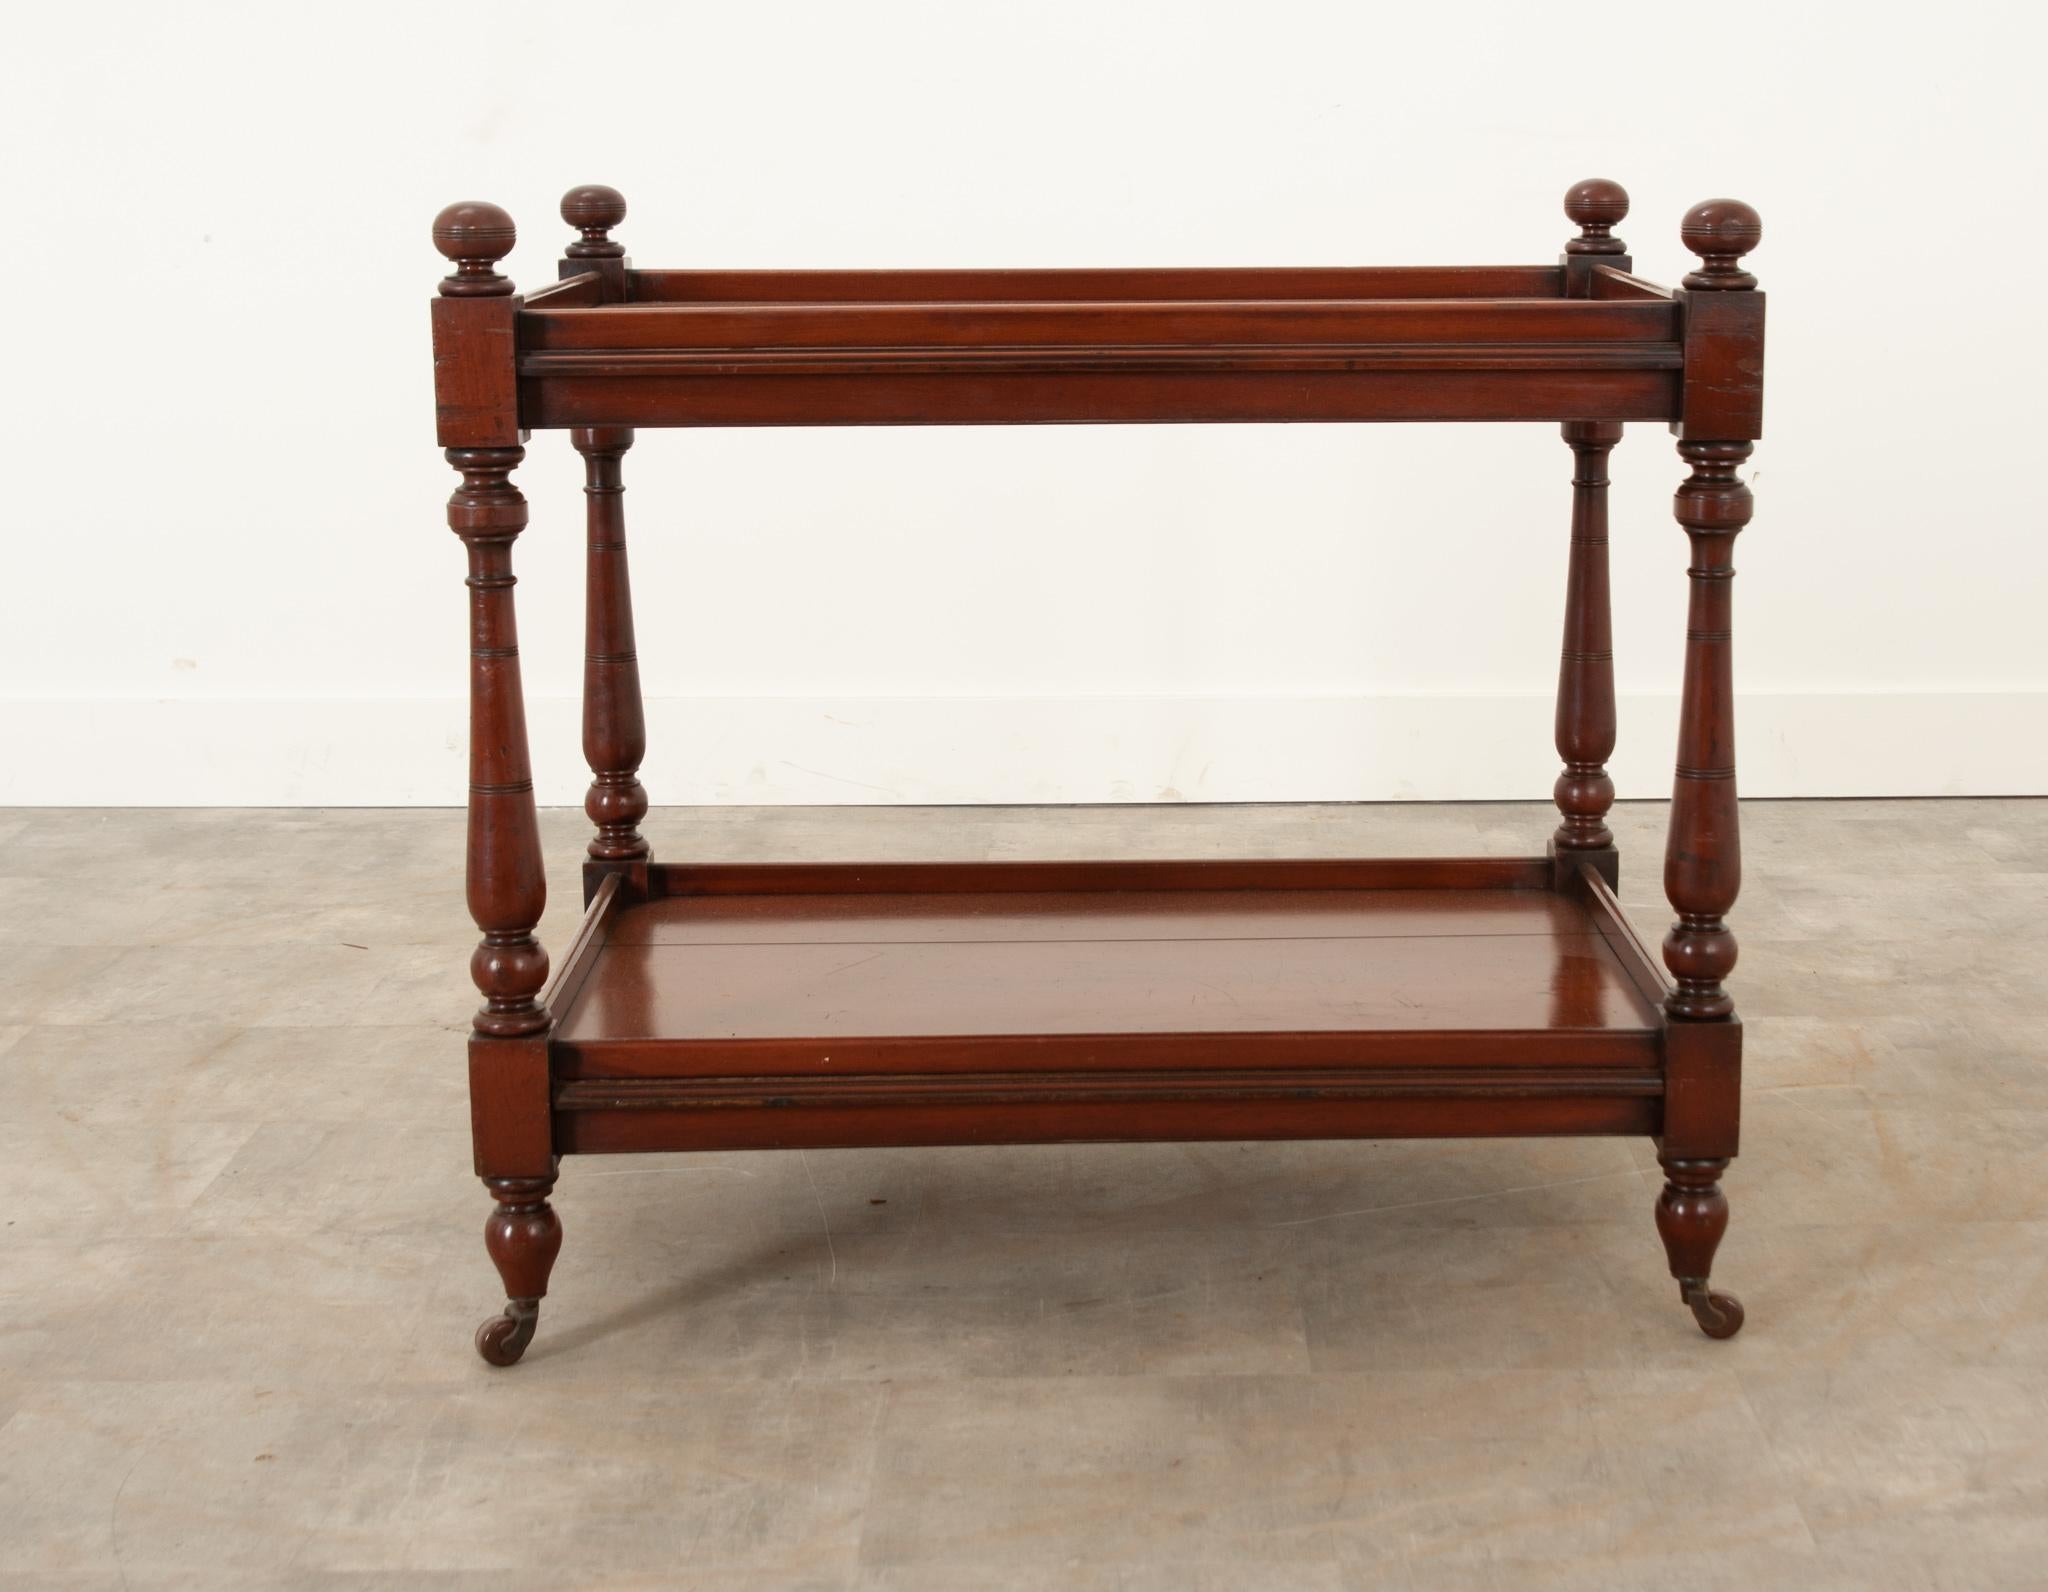 An English tea trolley crafted in the 19th century. The mahogany is stunning, with a deep, rich color and lovely patina. Two tiers are each enclosed with a molded edge. The four upright supports have been turned and styled to give this otherwise